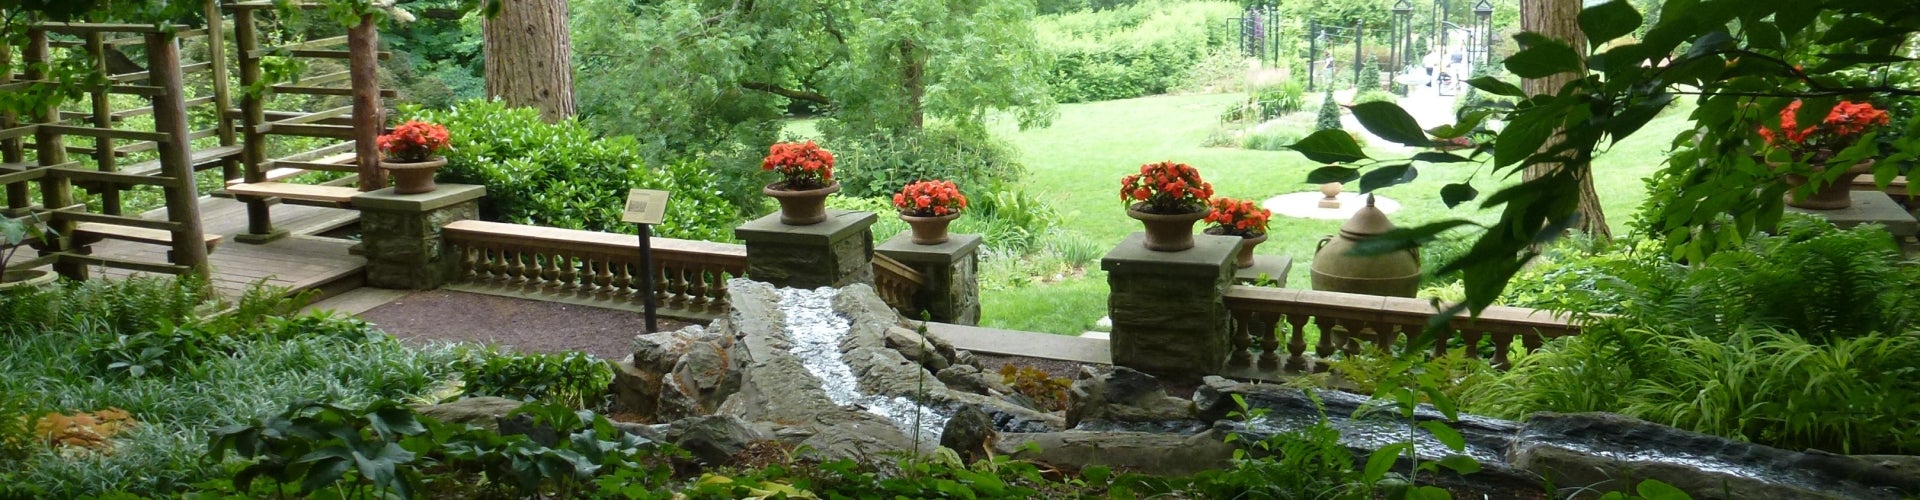 A stone walkway with planters filled with orange flowers, surrounded by greenery. 